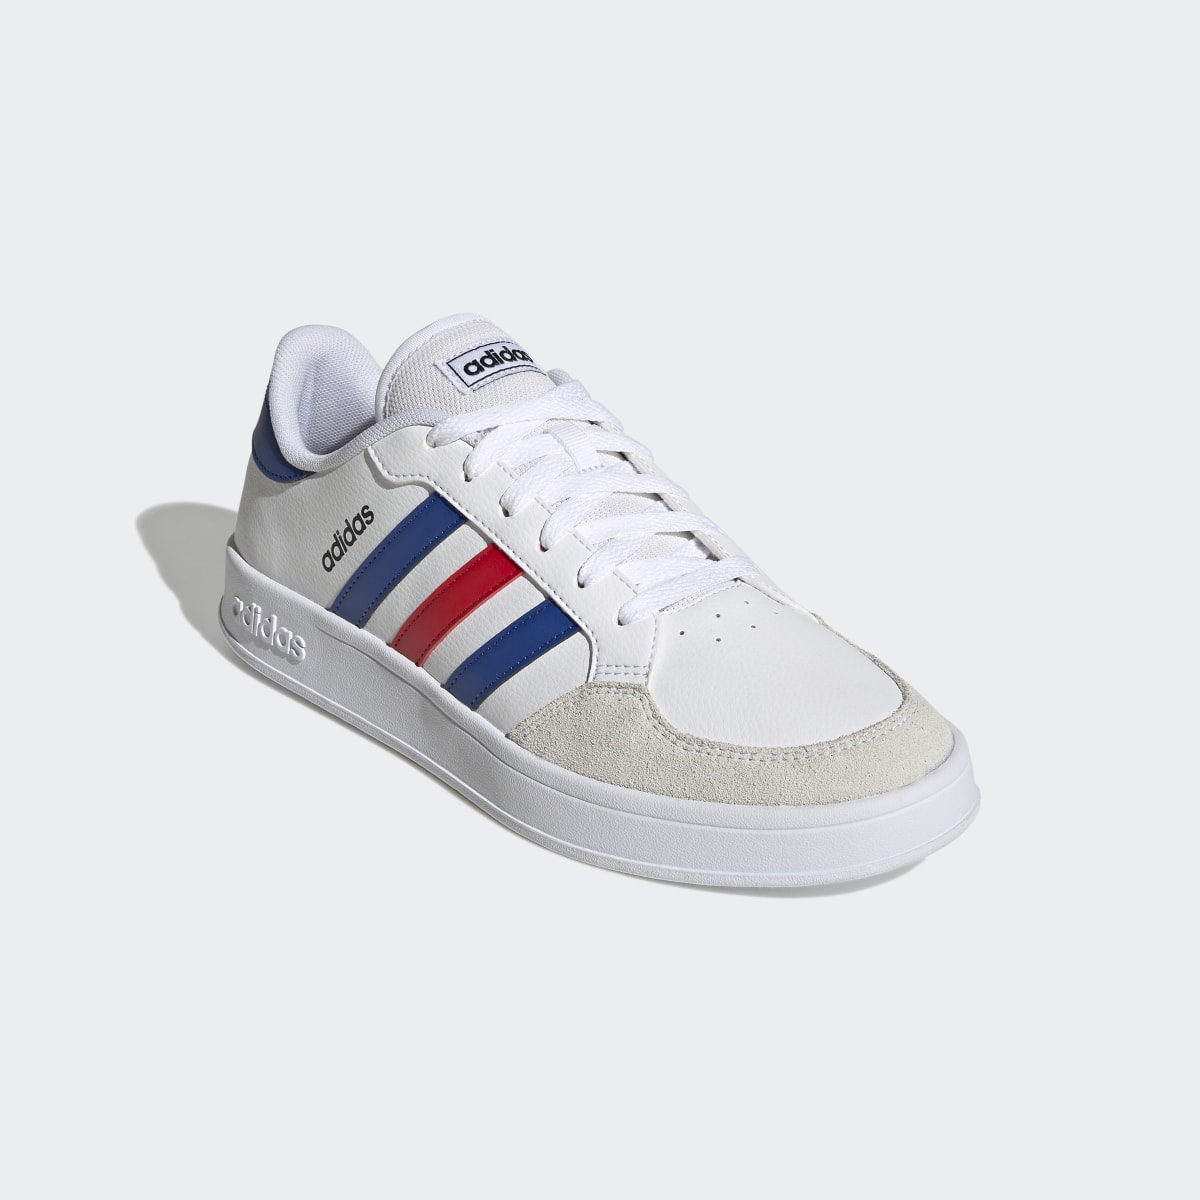 Adidas Breaknet Court Lifestyle Shoes. 5